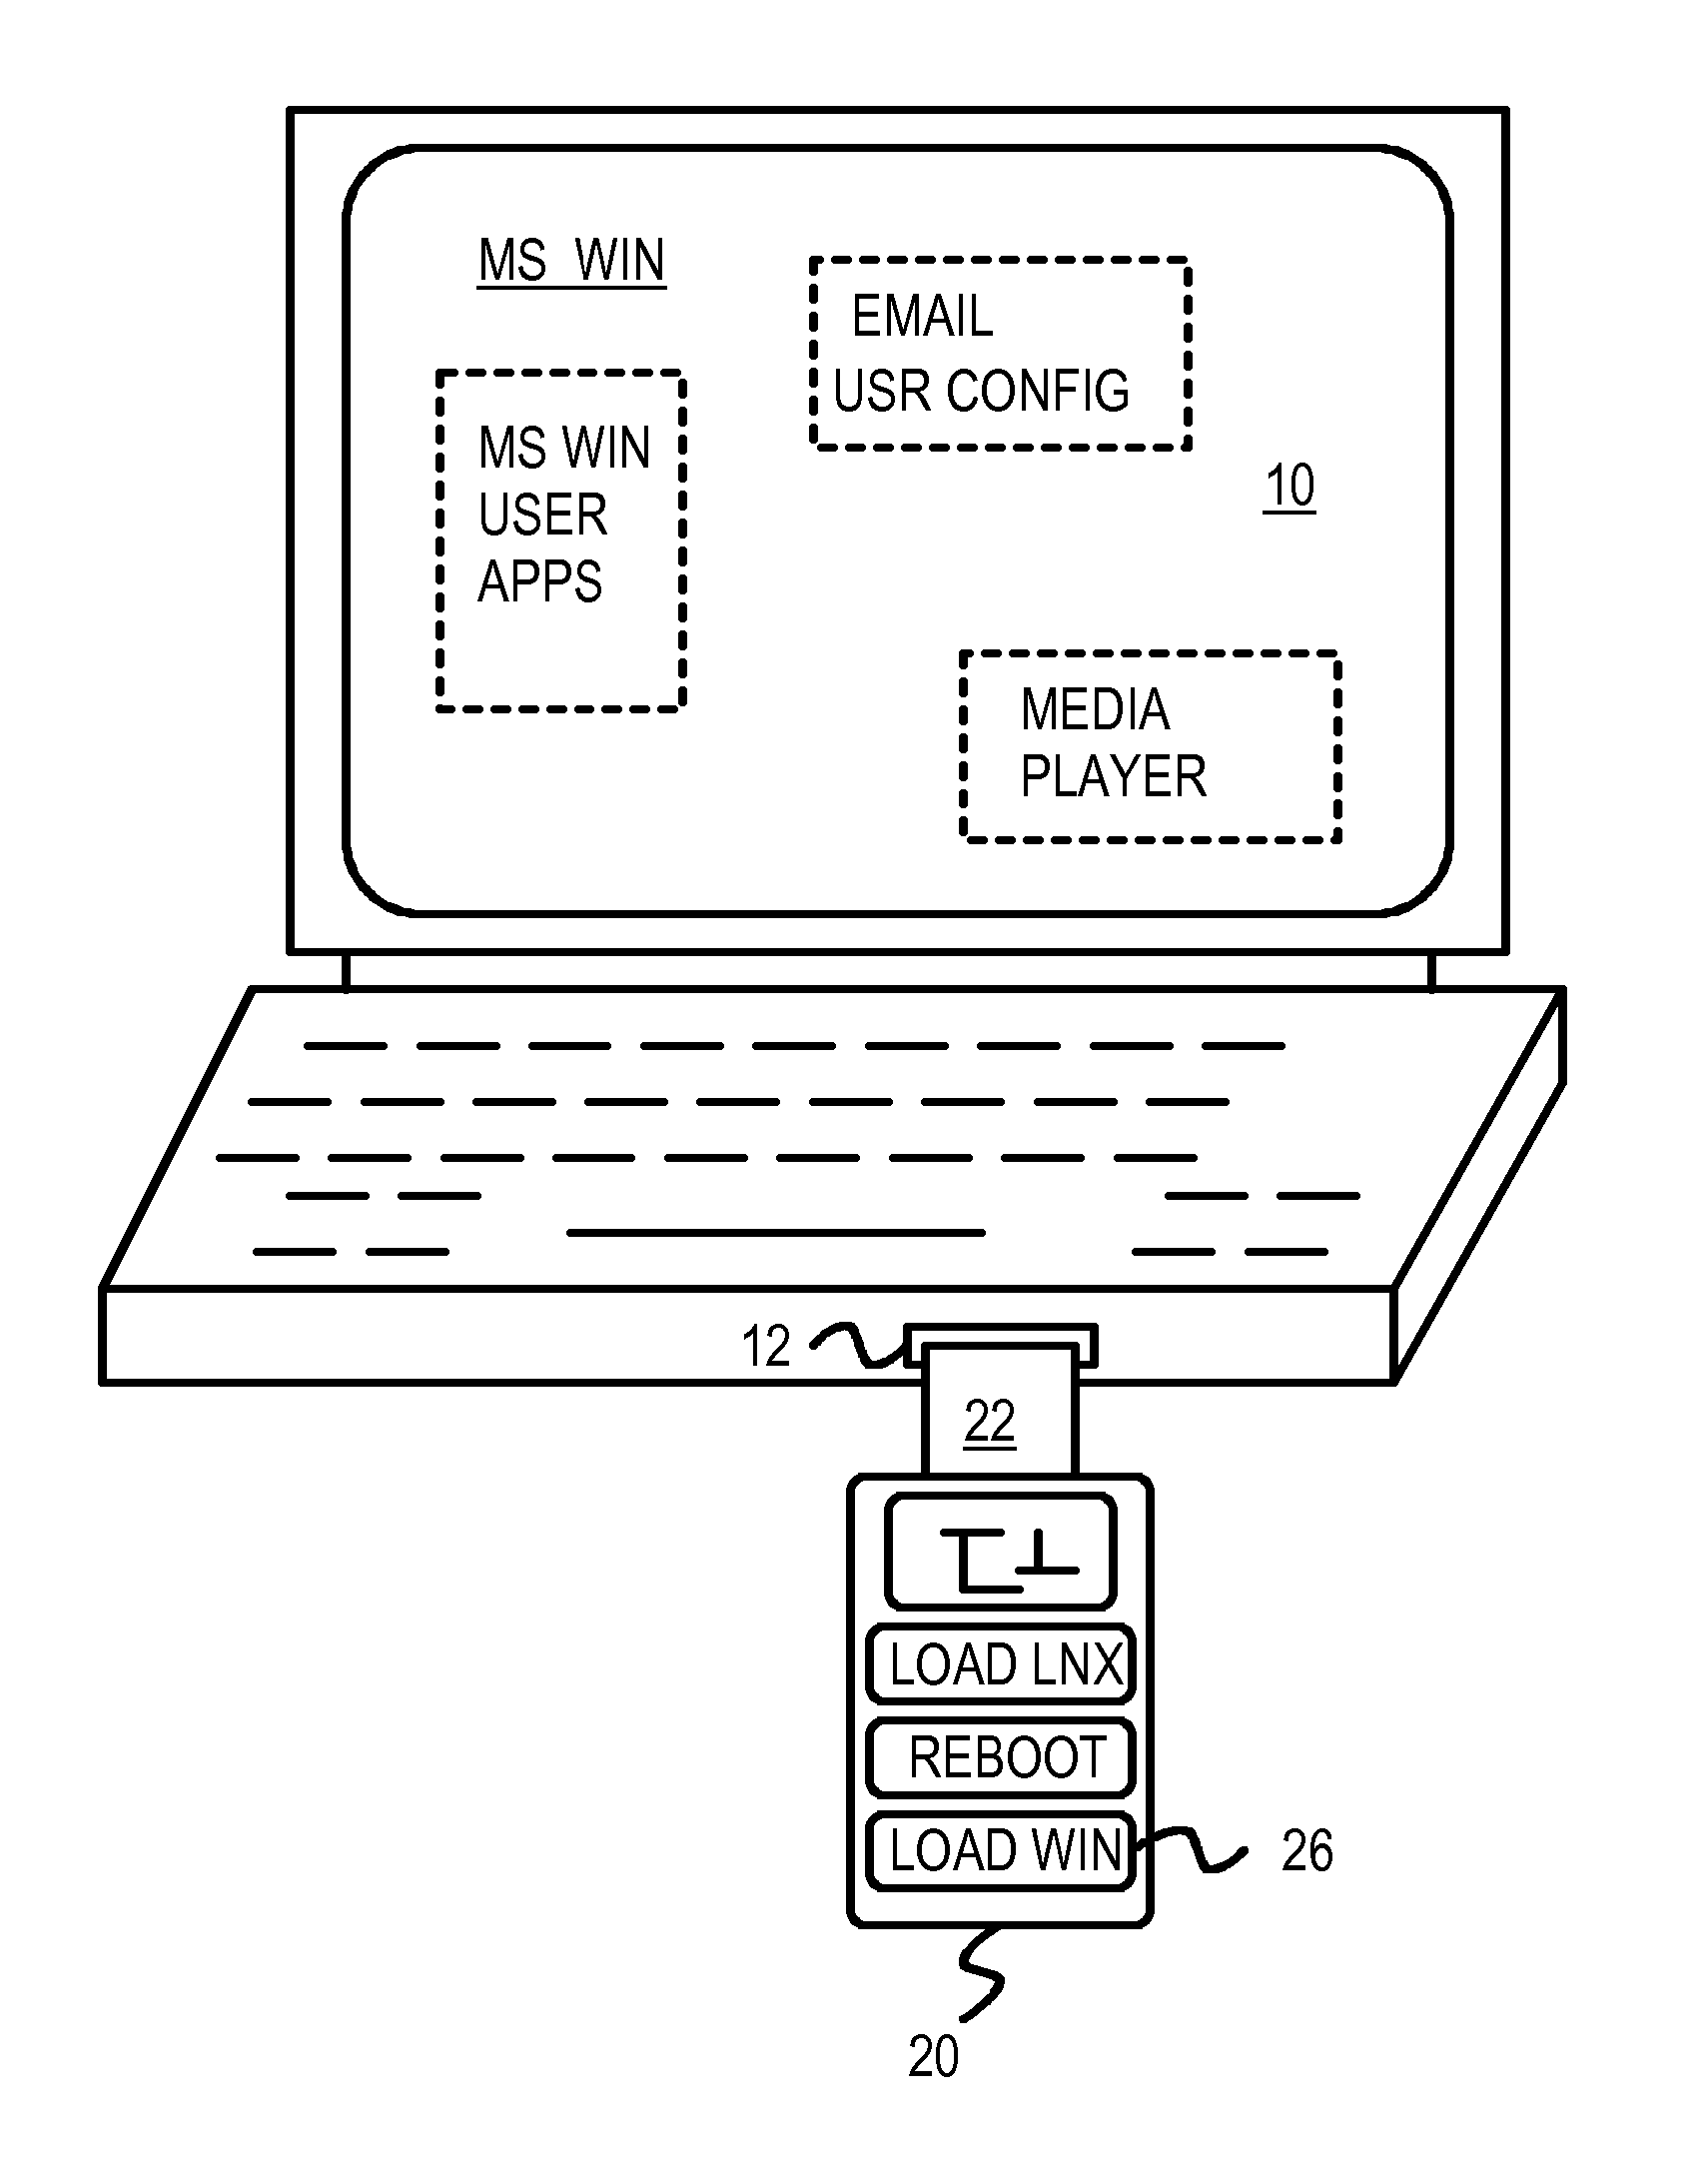 Multi-partition USB device that re-boots a PC to an alternate operating system for virus recovery